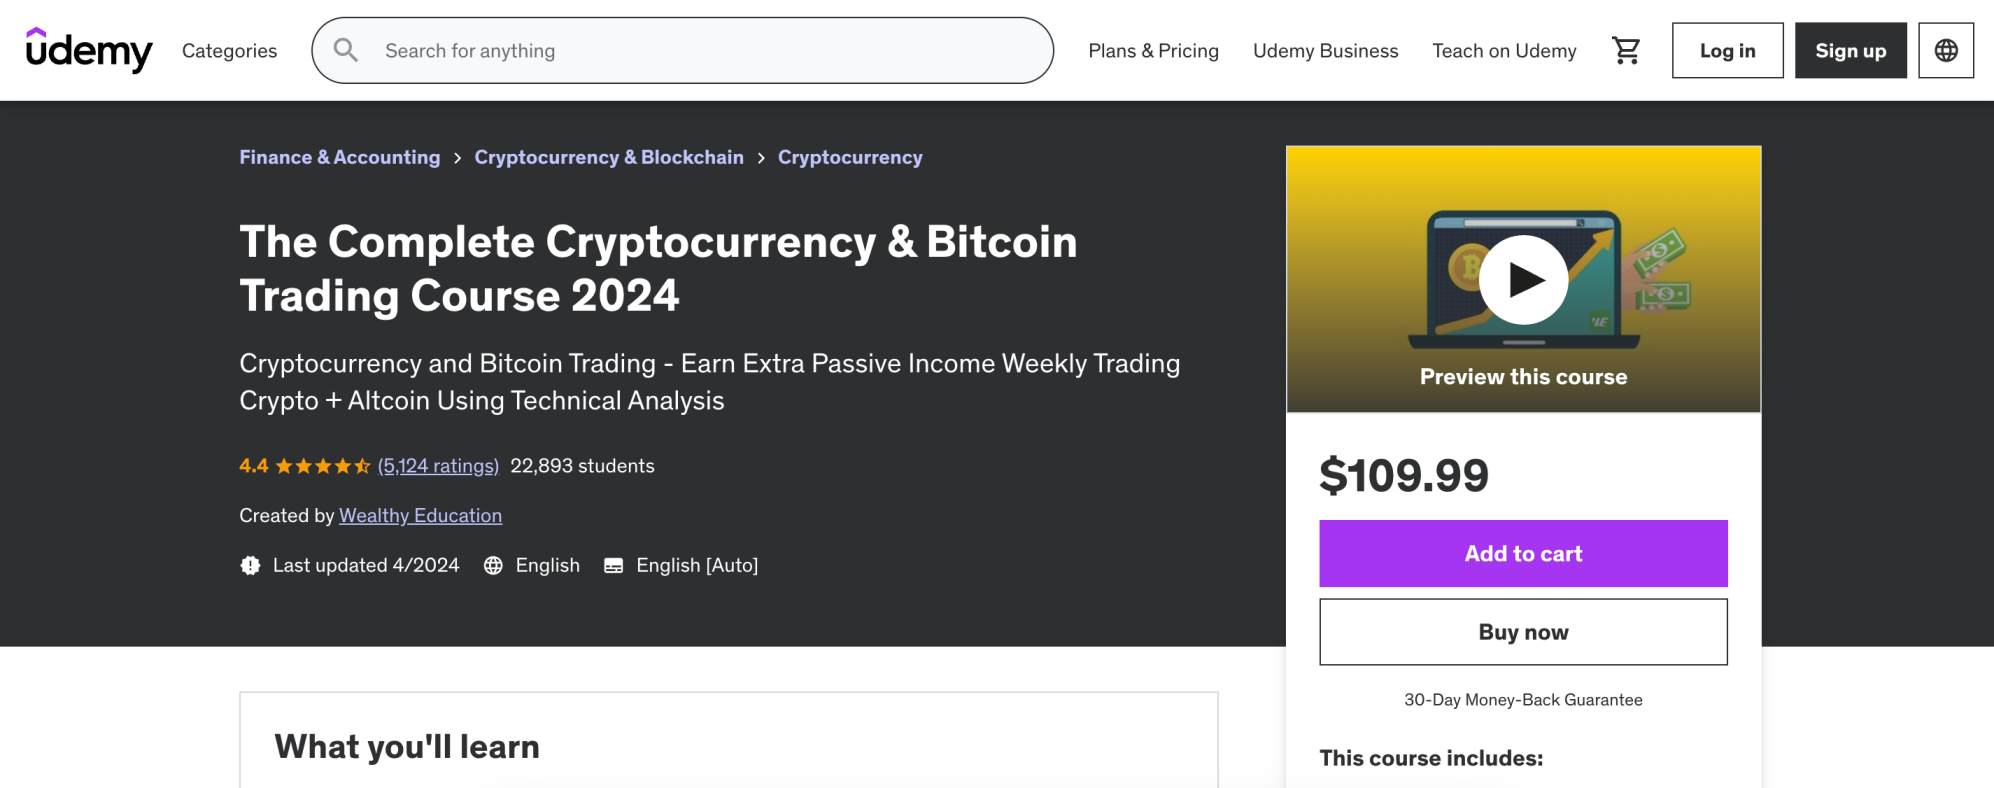 Complete Cryptocurrency & Bitcoin Trading Course